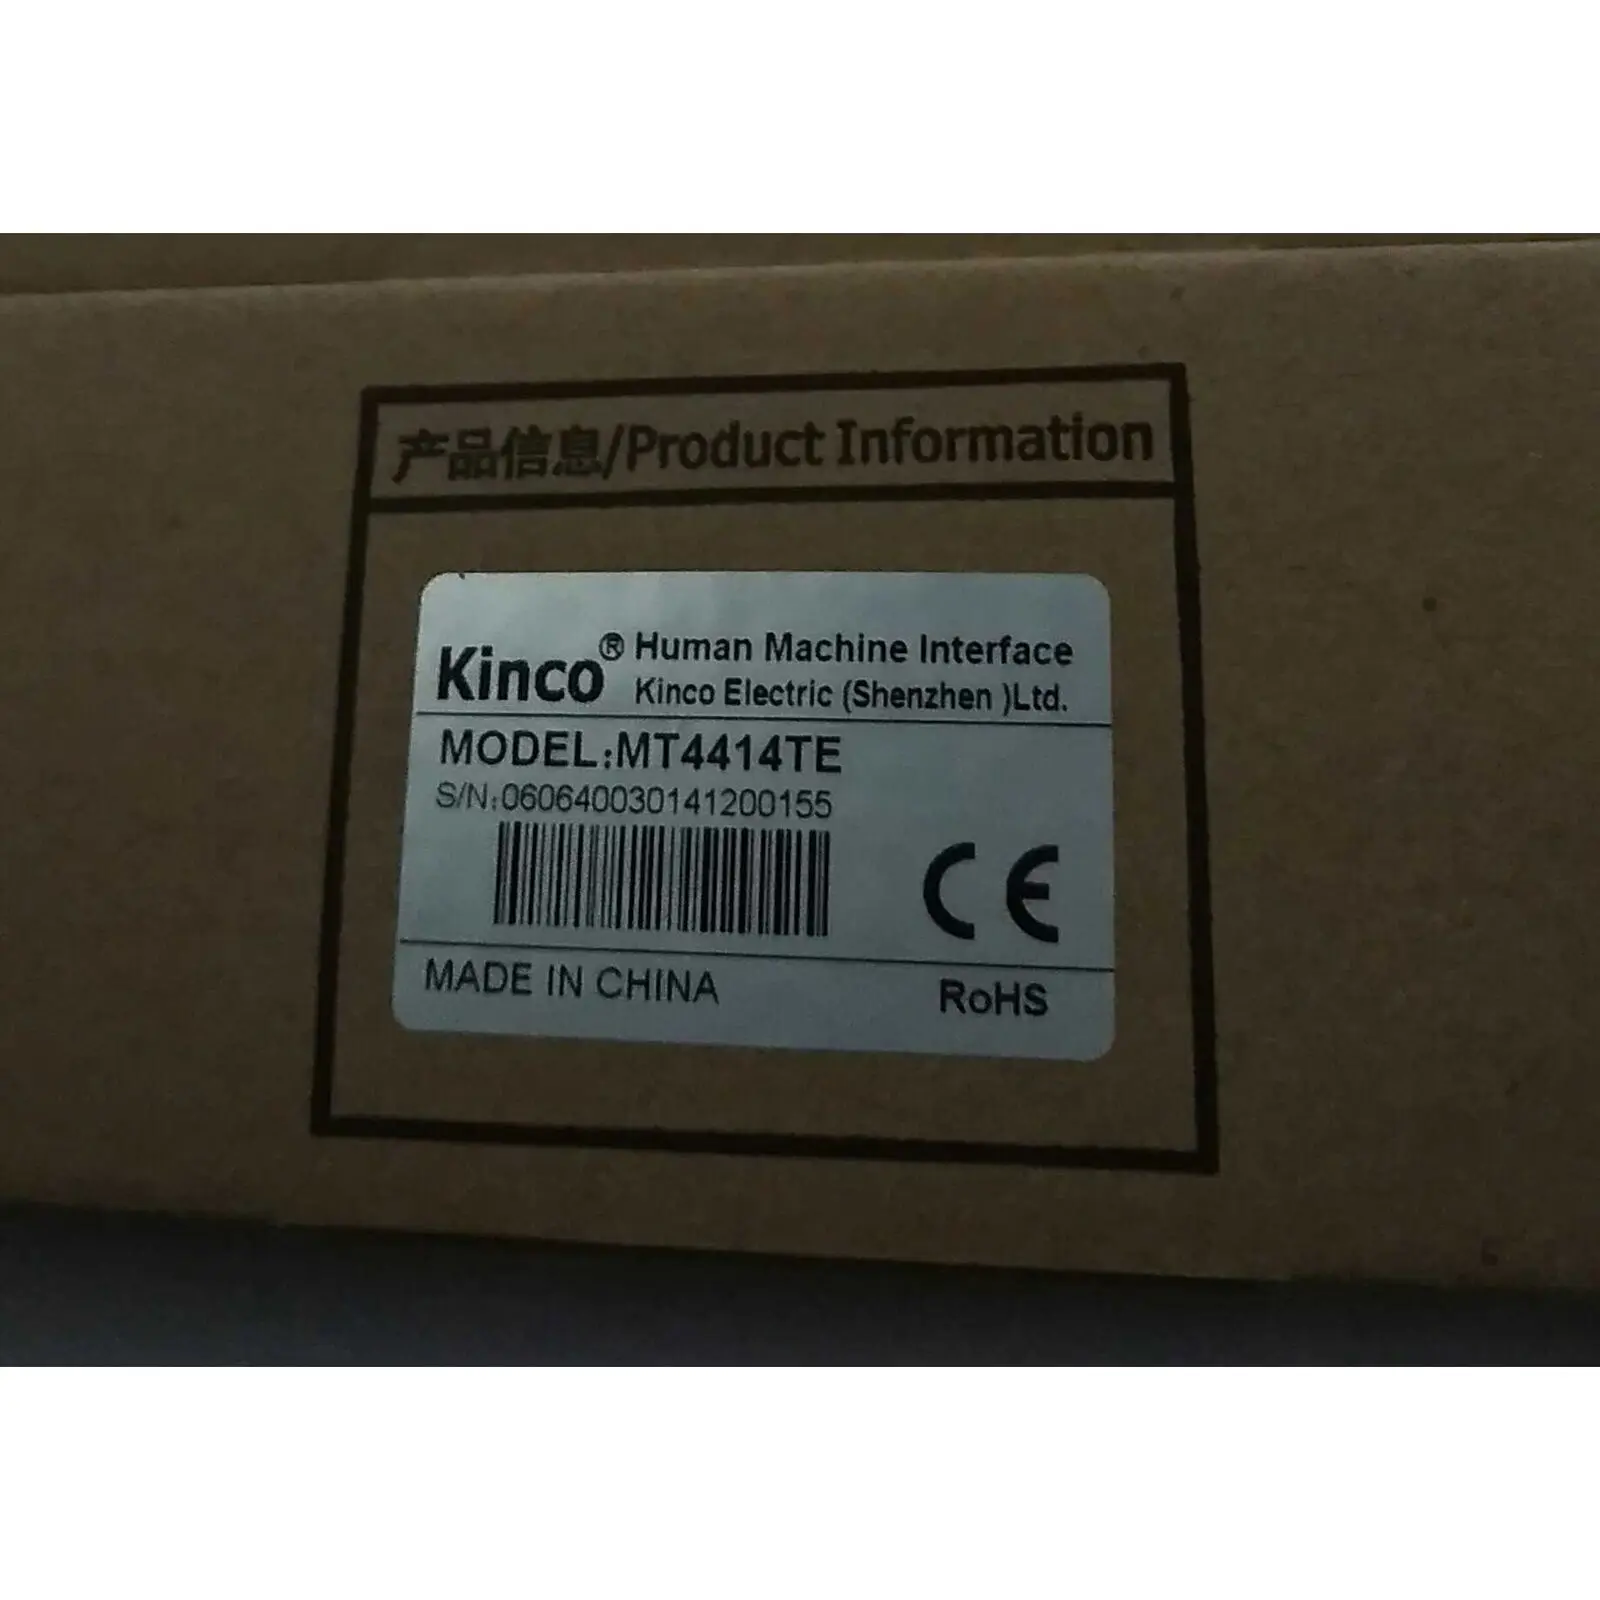 

ONE BRAND NEW Kinco HMI MT4414TE touch screen Fast Delivery